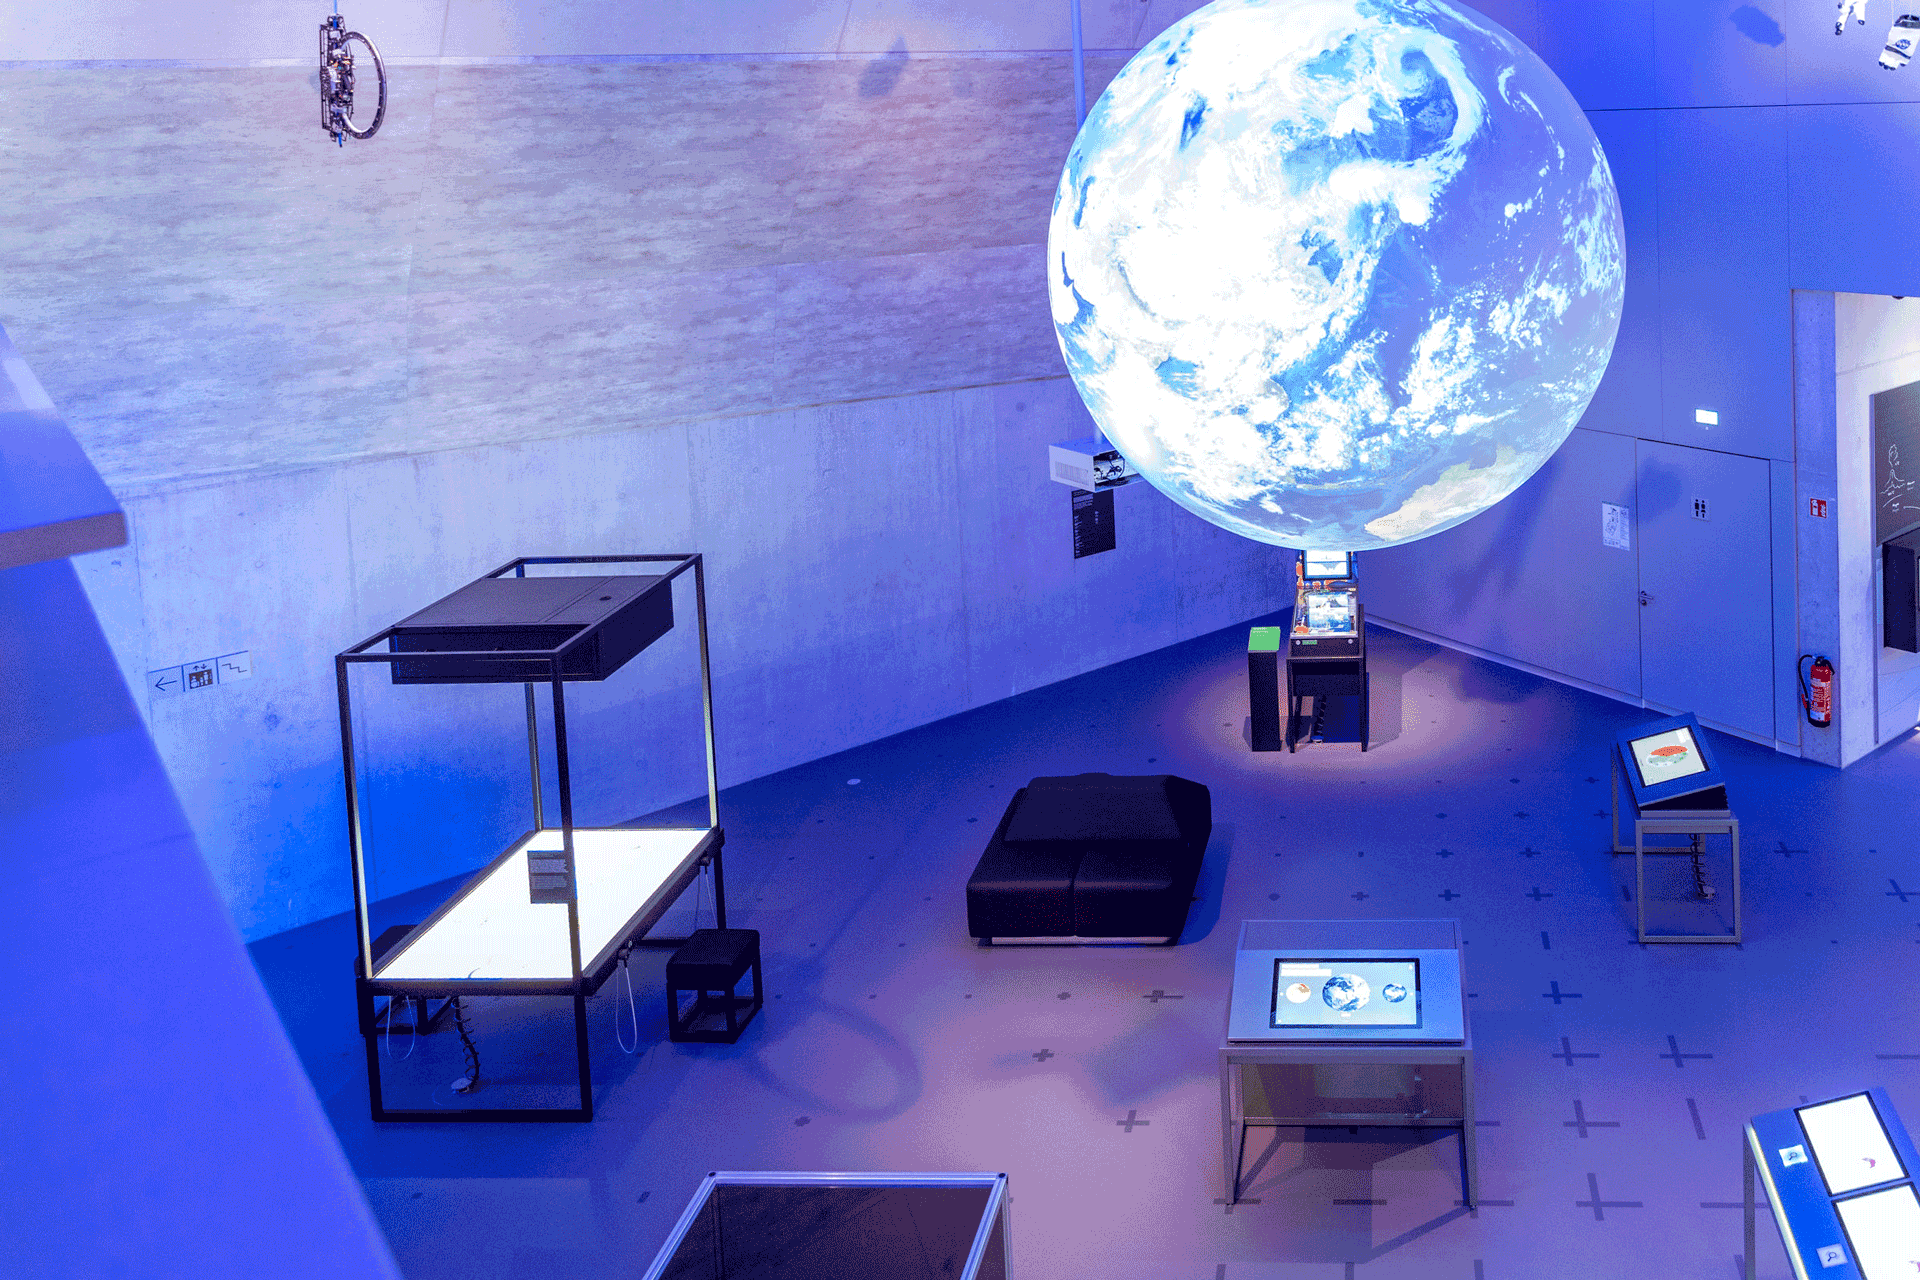 Overview image of Nuremberg Museum of the Future